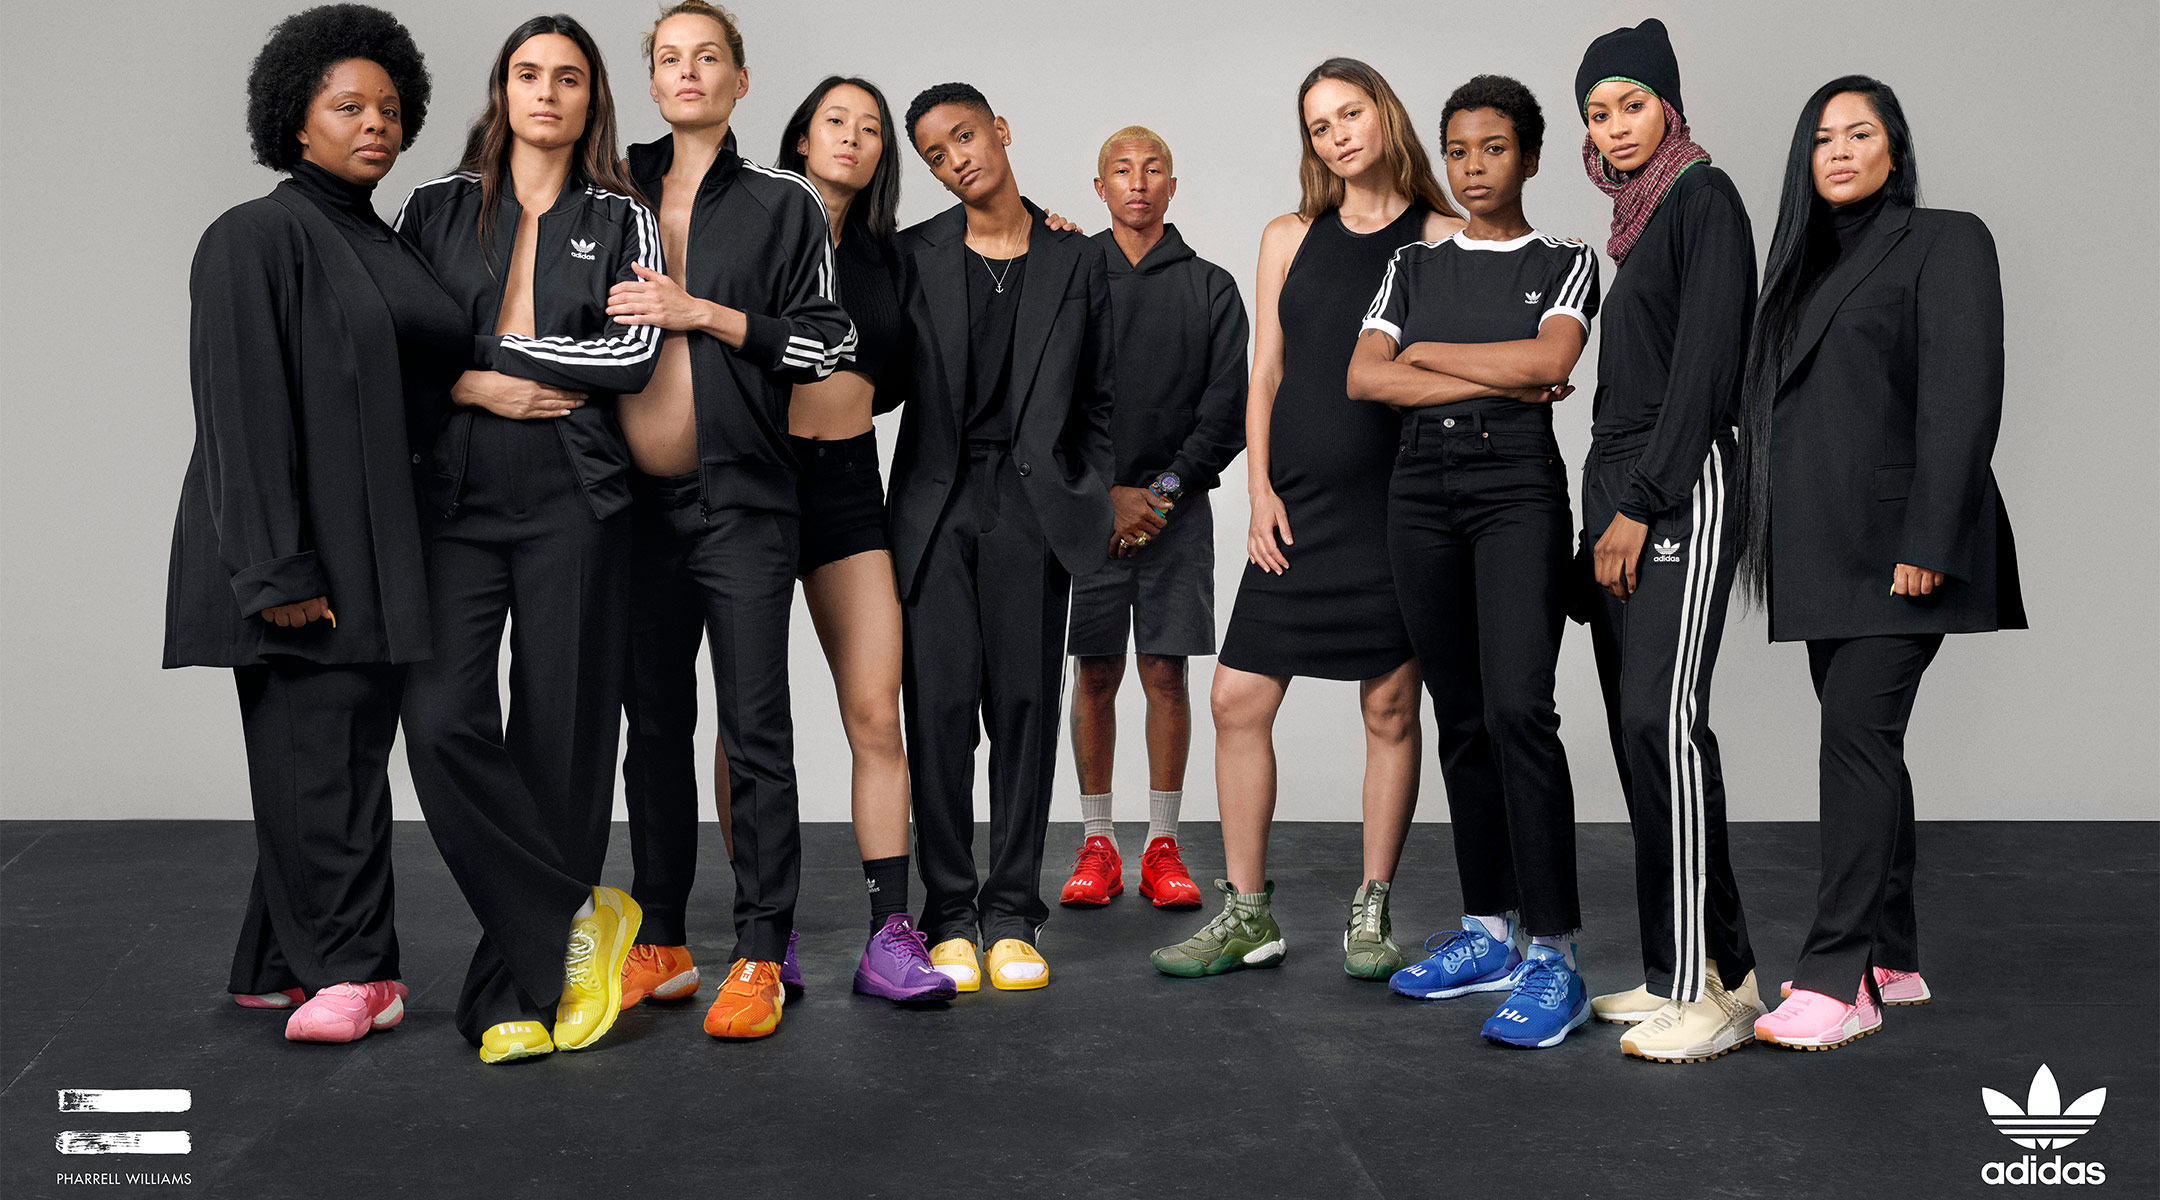 adidas launches ad campaign that celebrates women